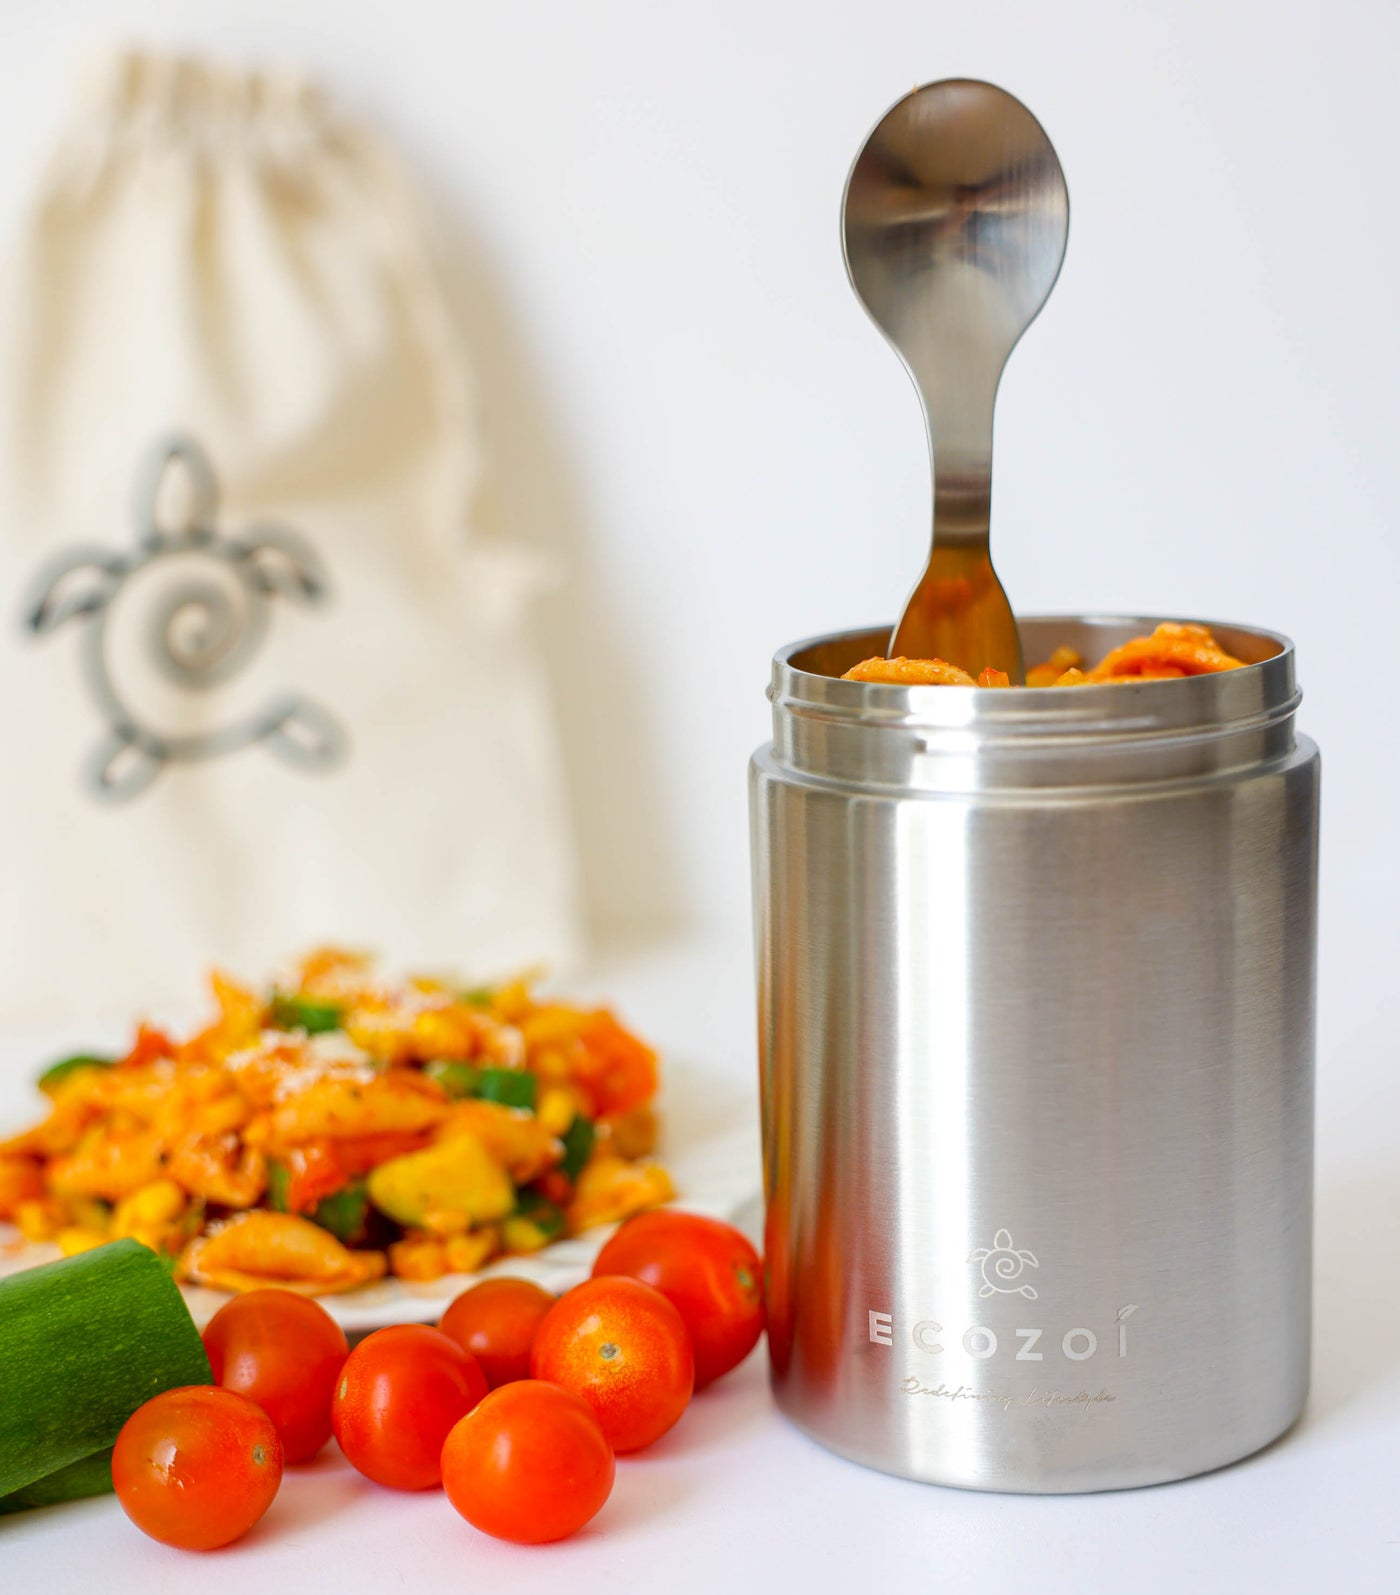 ecozoi Vacuum Insulated Stainless Steel Food Jar - 17 oz with Spork & Lunch Bag